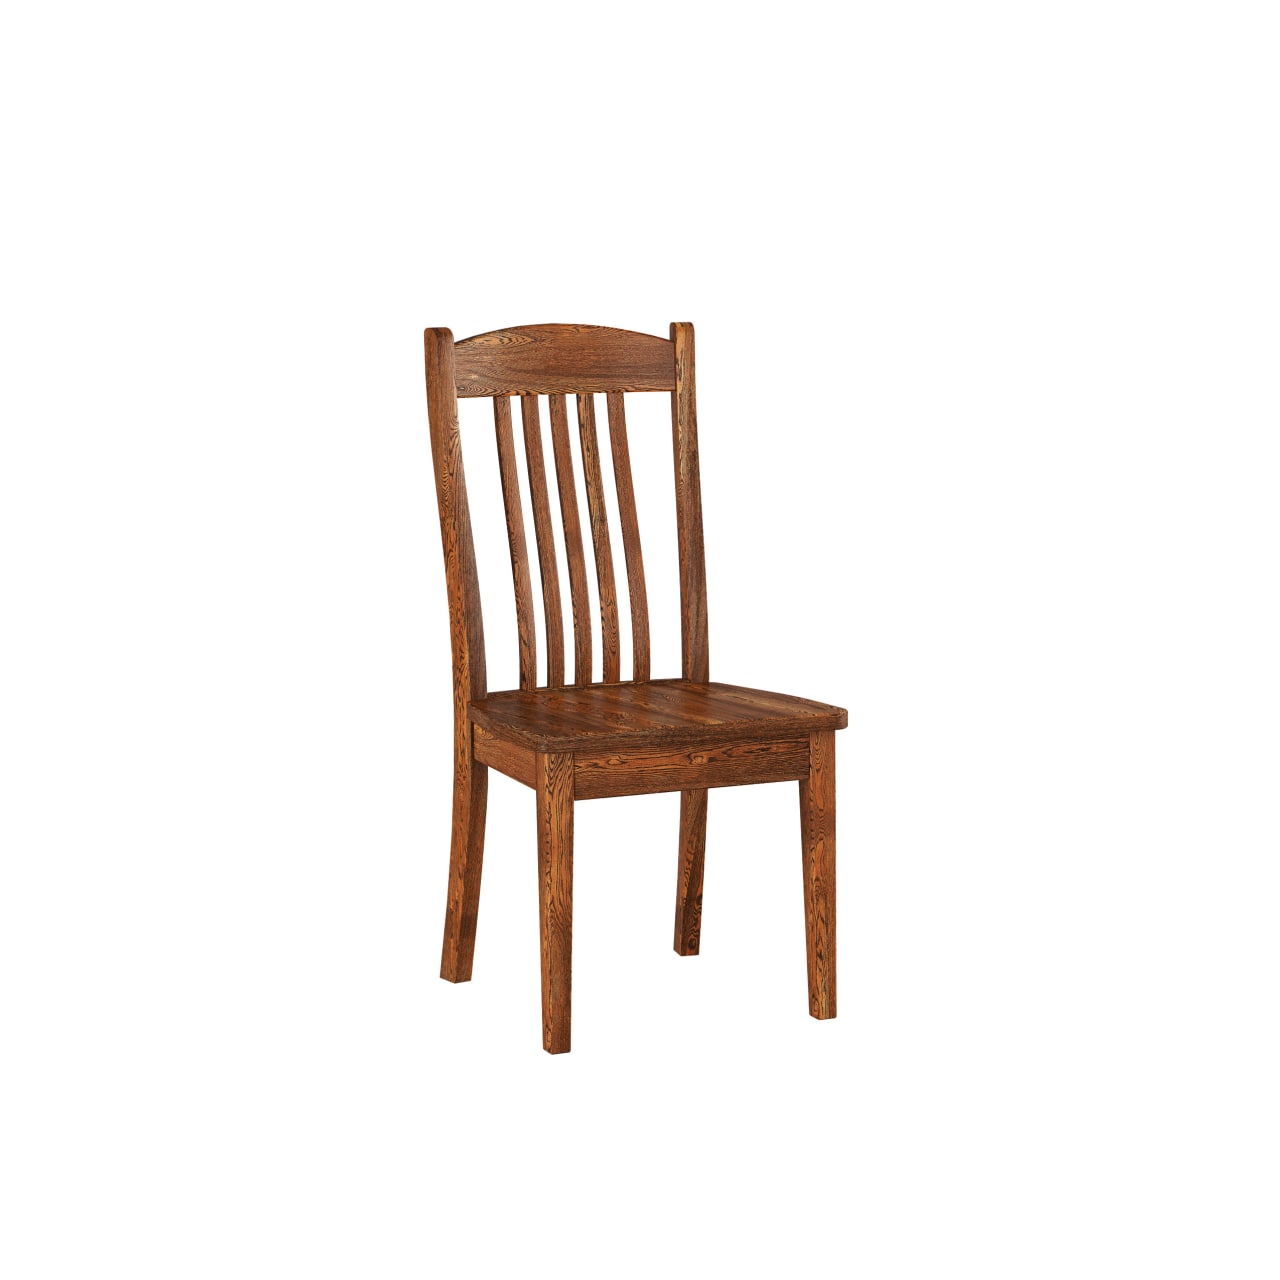 A Simple Furniture Modeling for a Chair